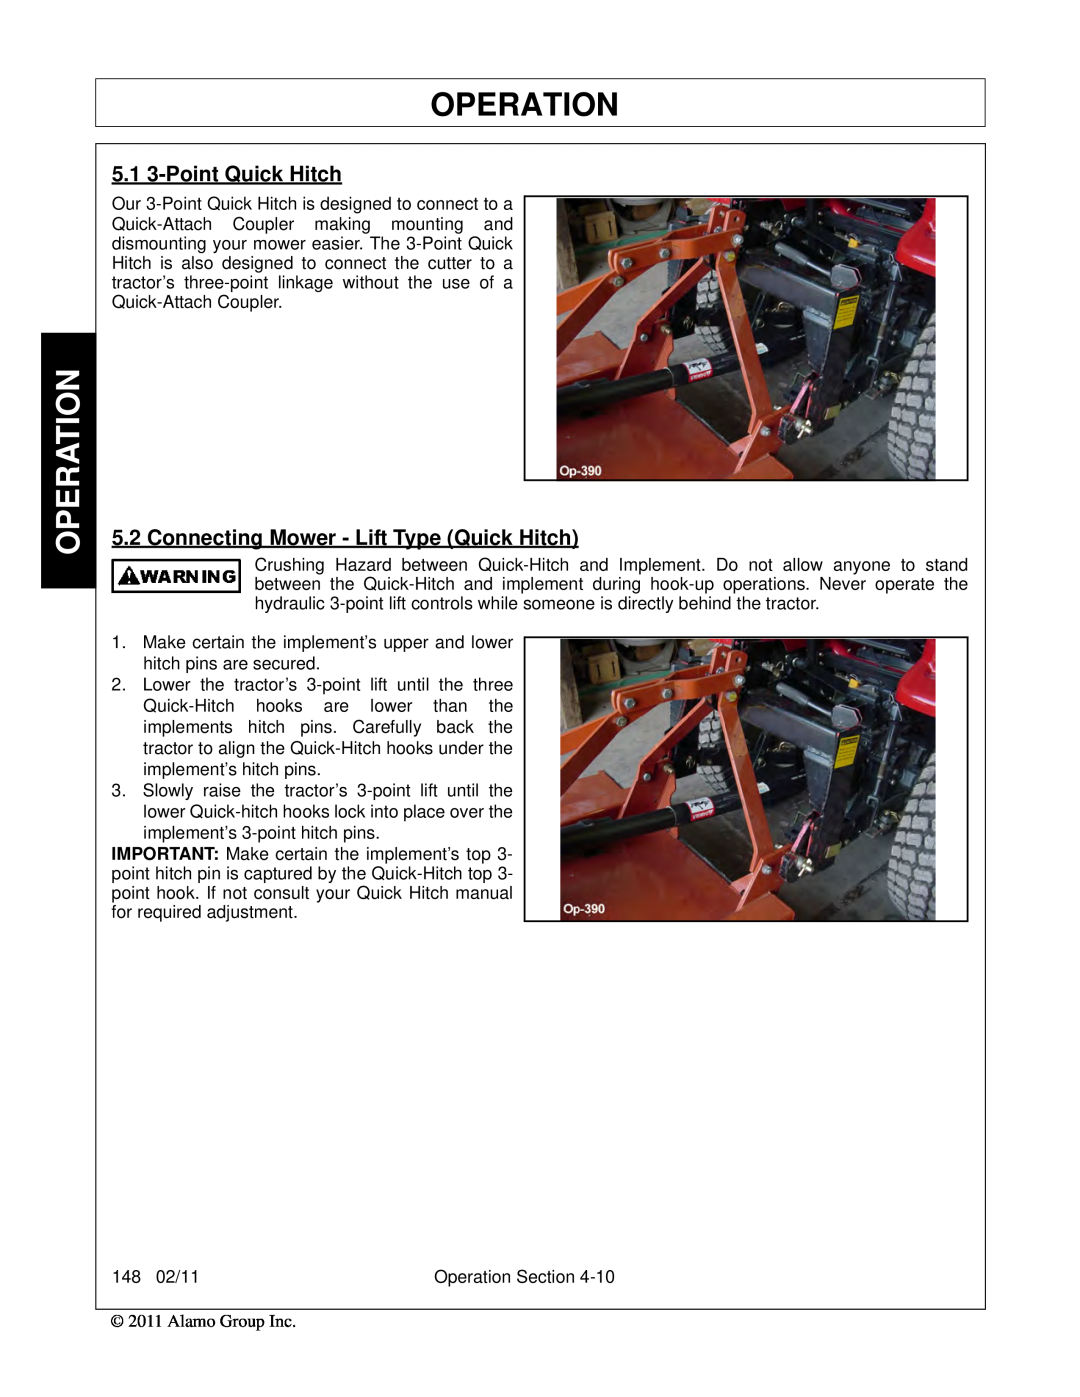 Rhino Mounts 148 manual Operation, 5.1 3-Point Quick Hitch, Connecting Mower - Lift Type Quick Hitch 